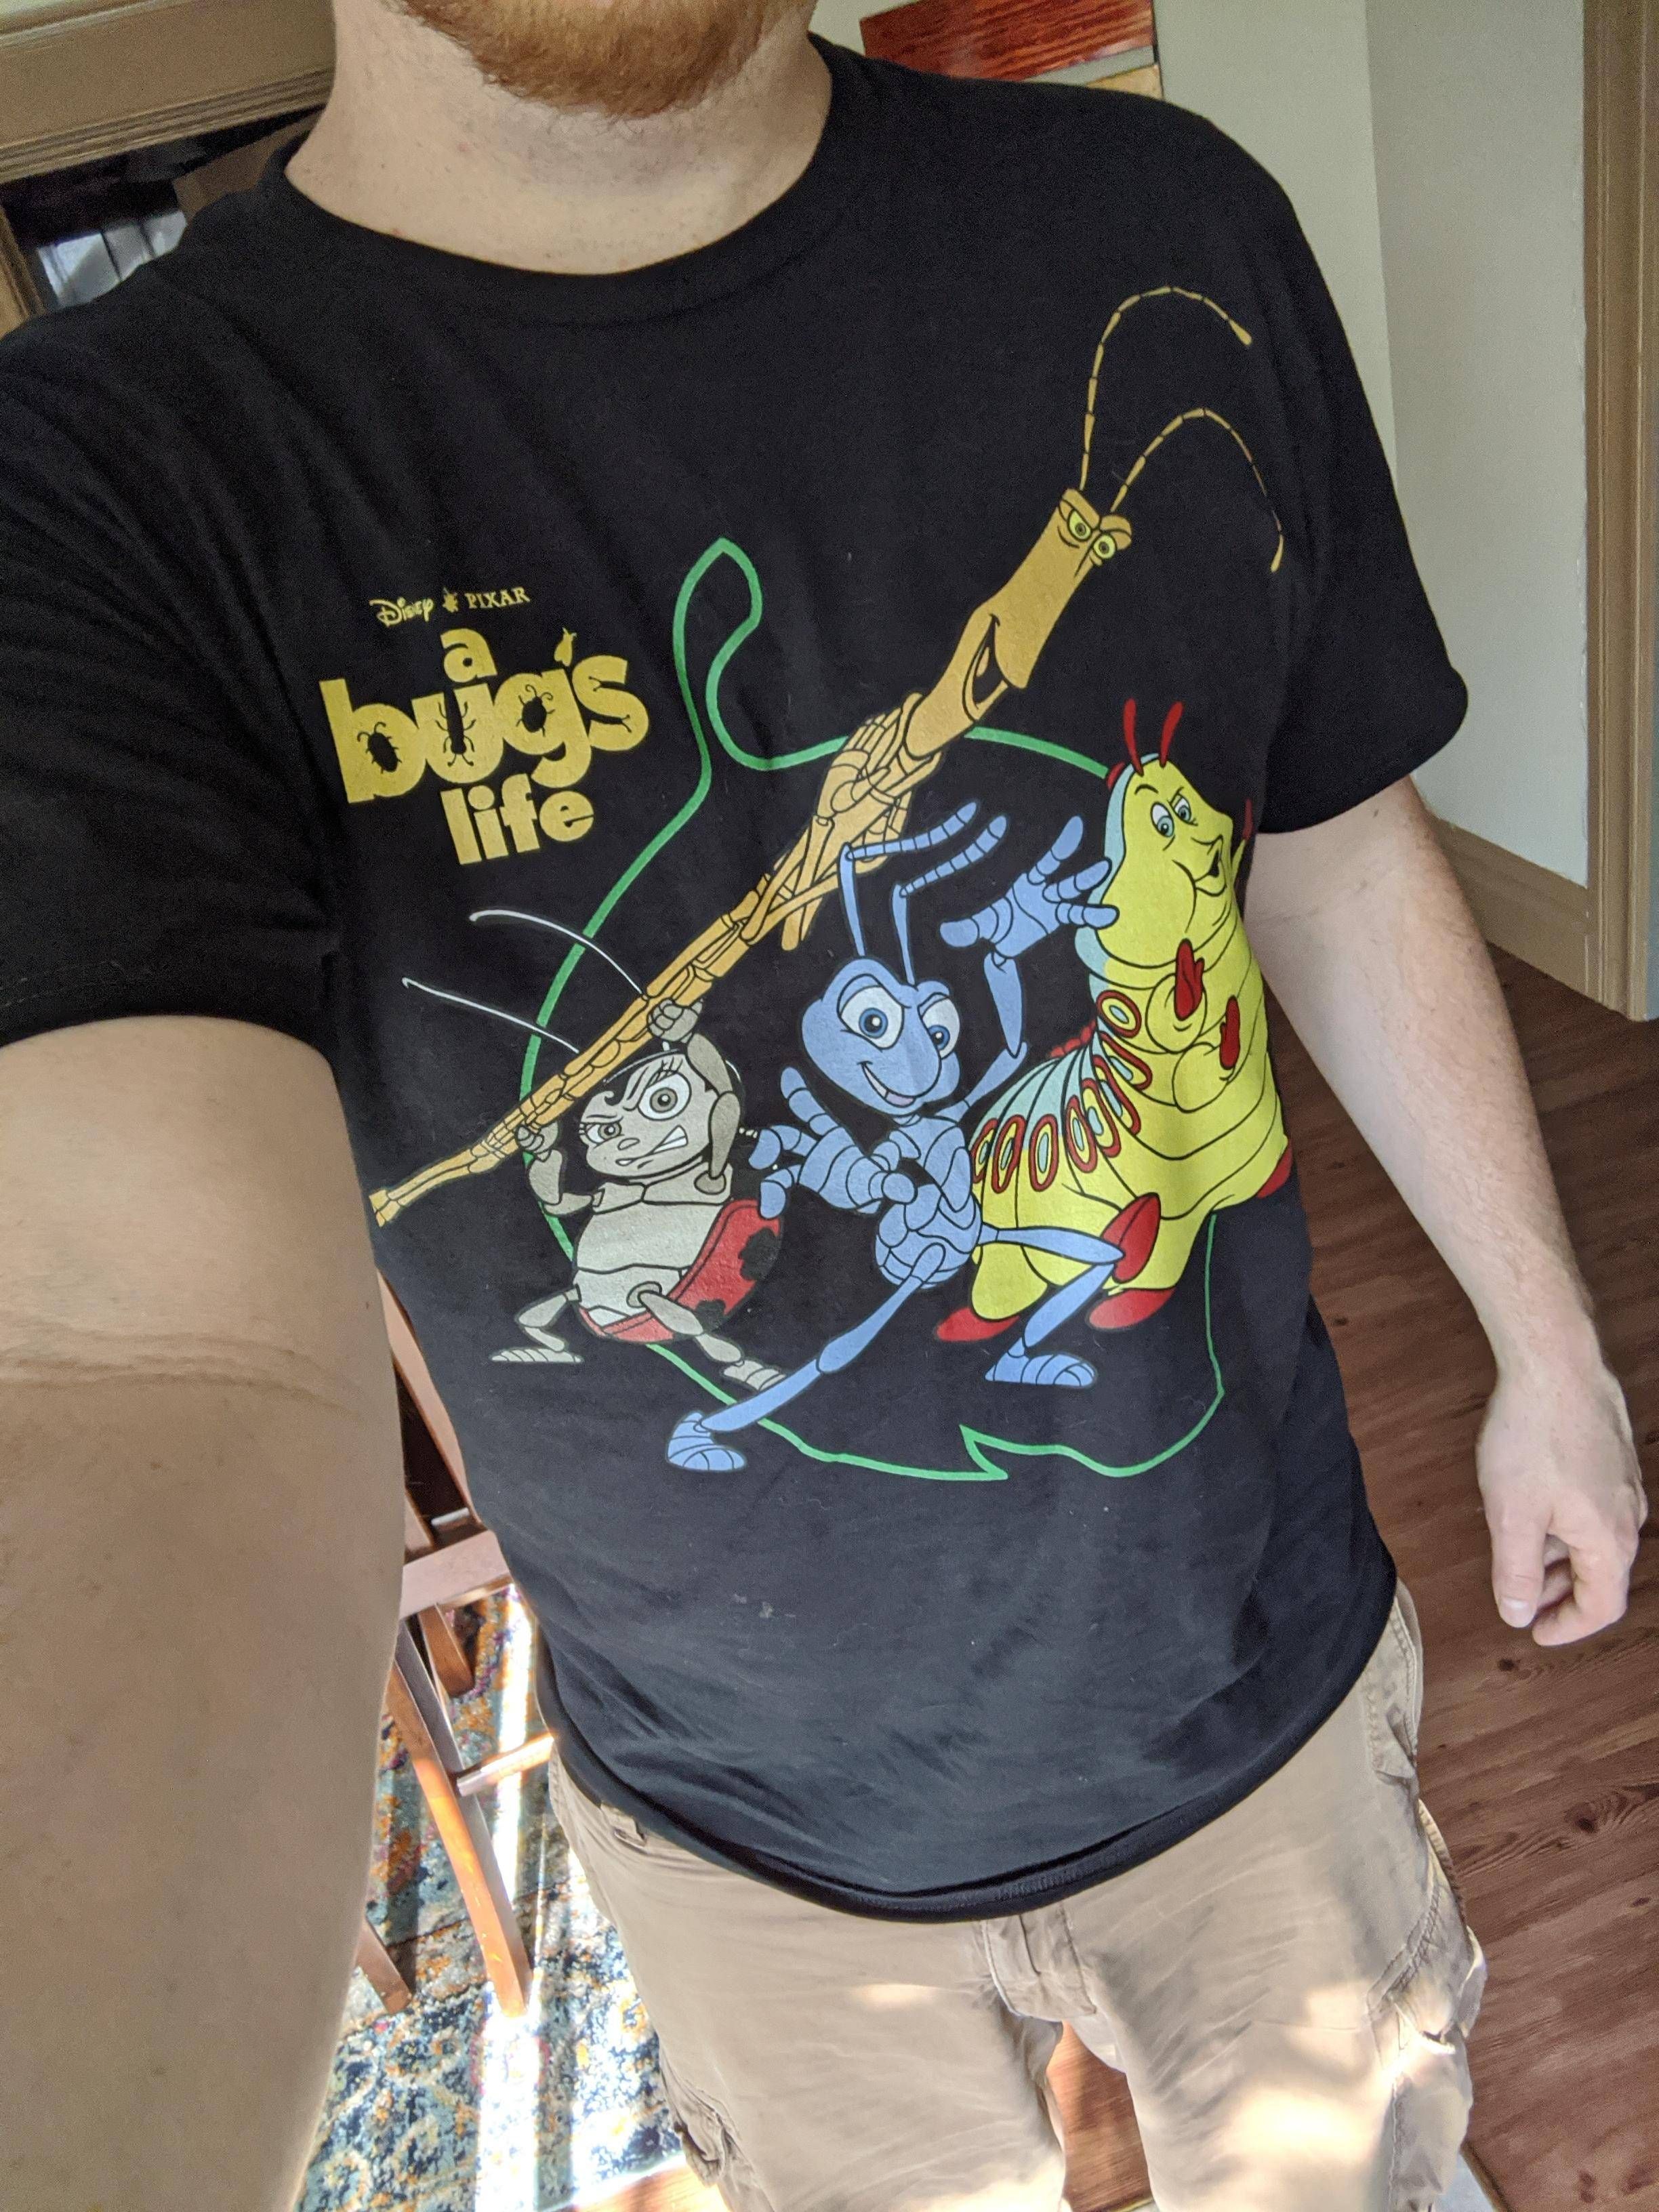 A friend called me up and asked what I want for my birthday. I said "anything but a shirt" but he heard "any kind of bug shirt", so here we are.